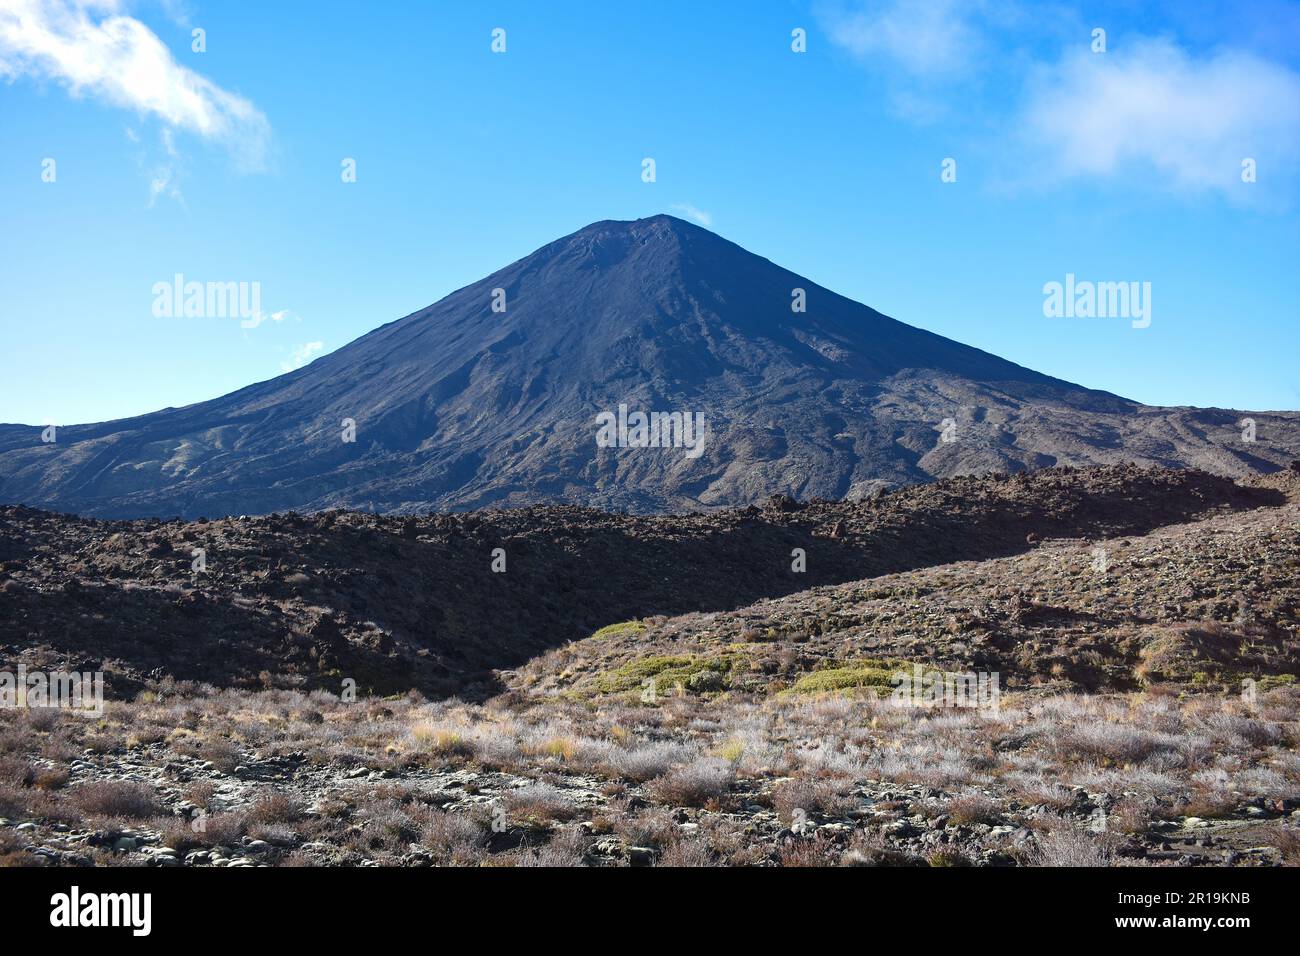 View of the Mt Ngauruhoe (Mount Doom) volcanic cone from the trekking route of the Tongariro Alpine Crossing trail on the North Island of New Zealand. Stock Photo